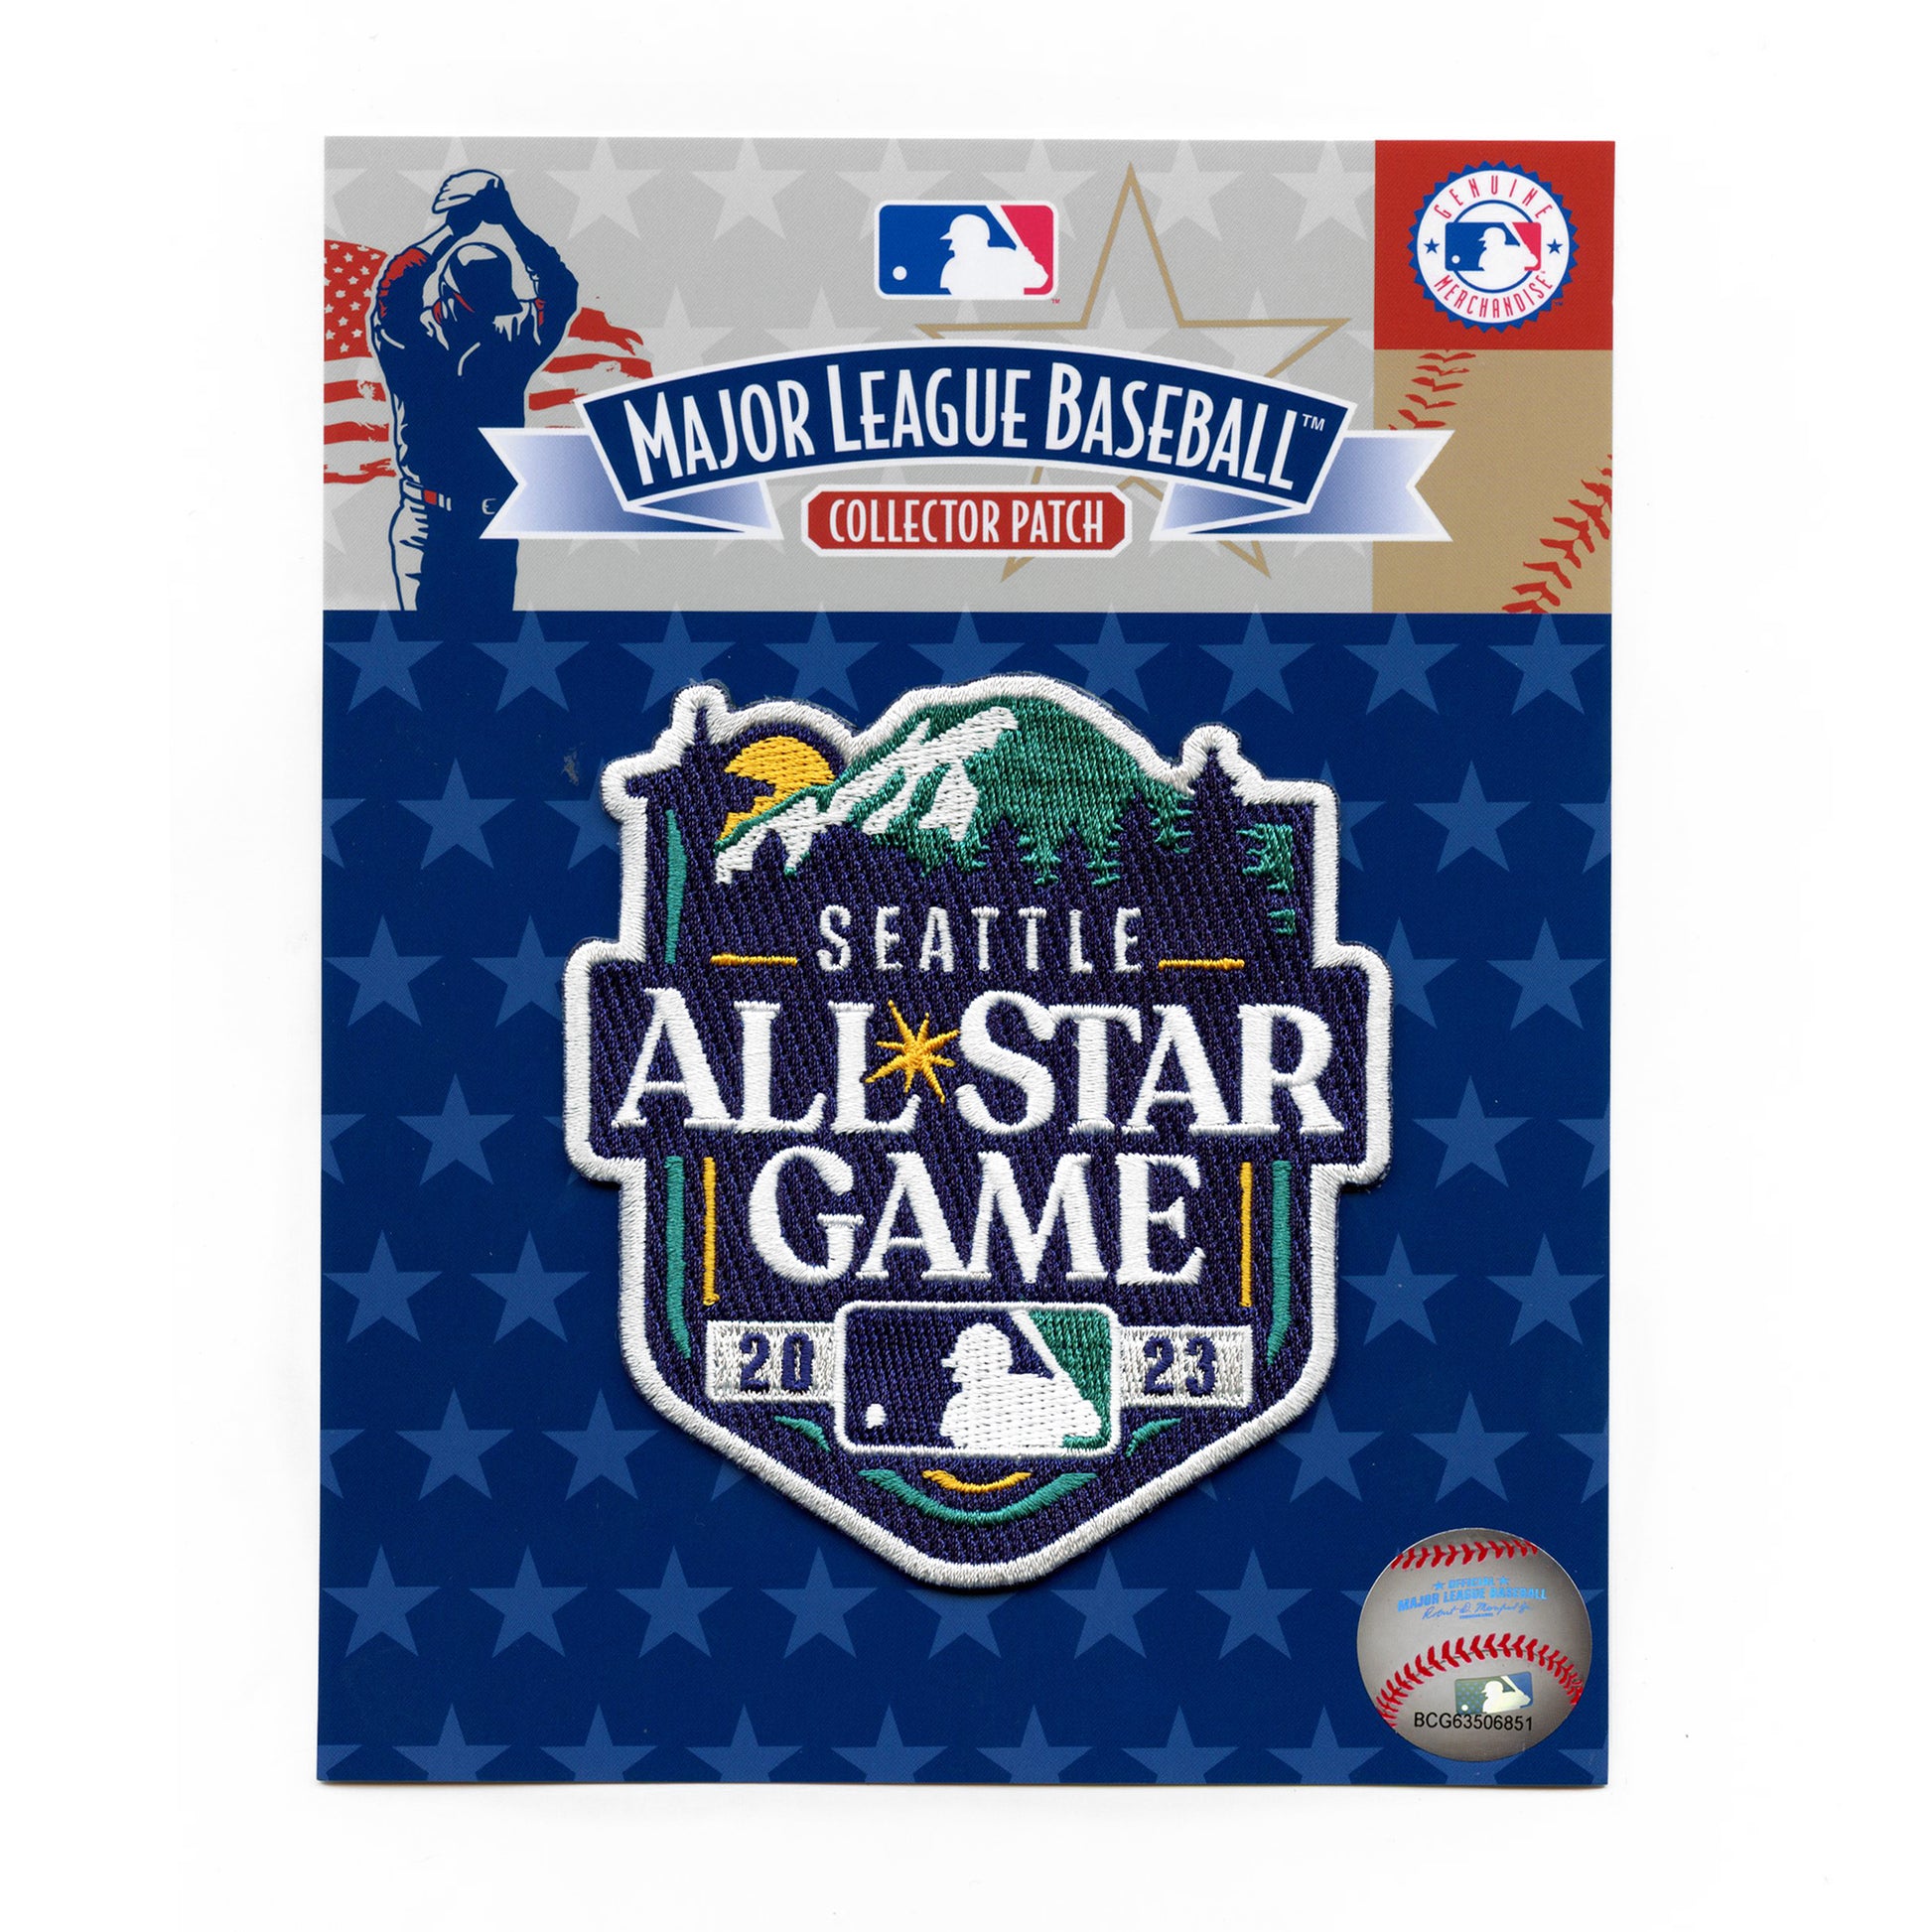 mariners all star game jersey